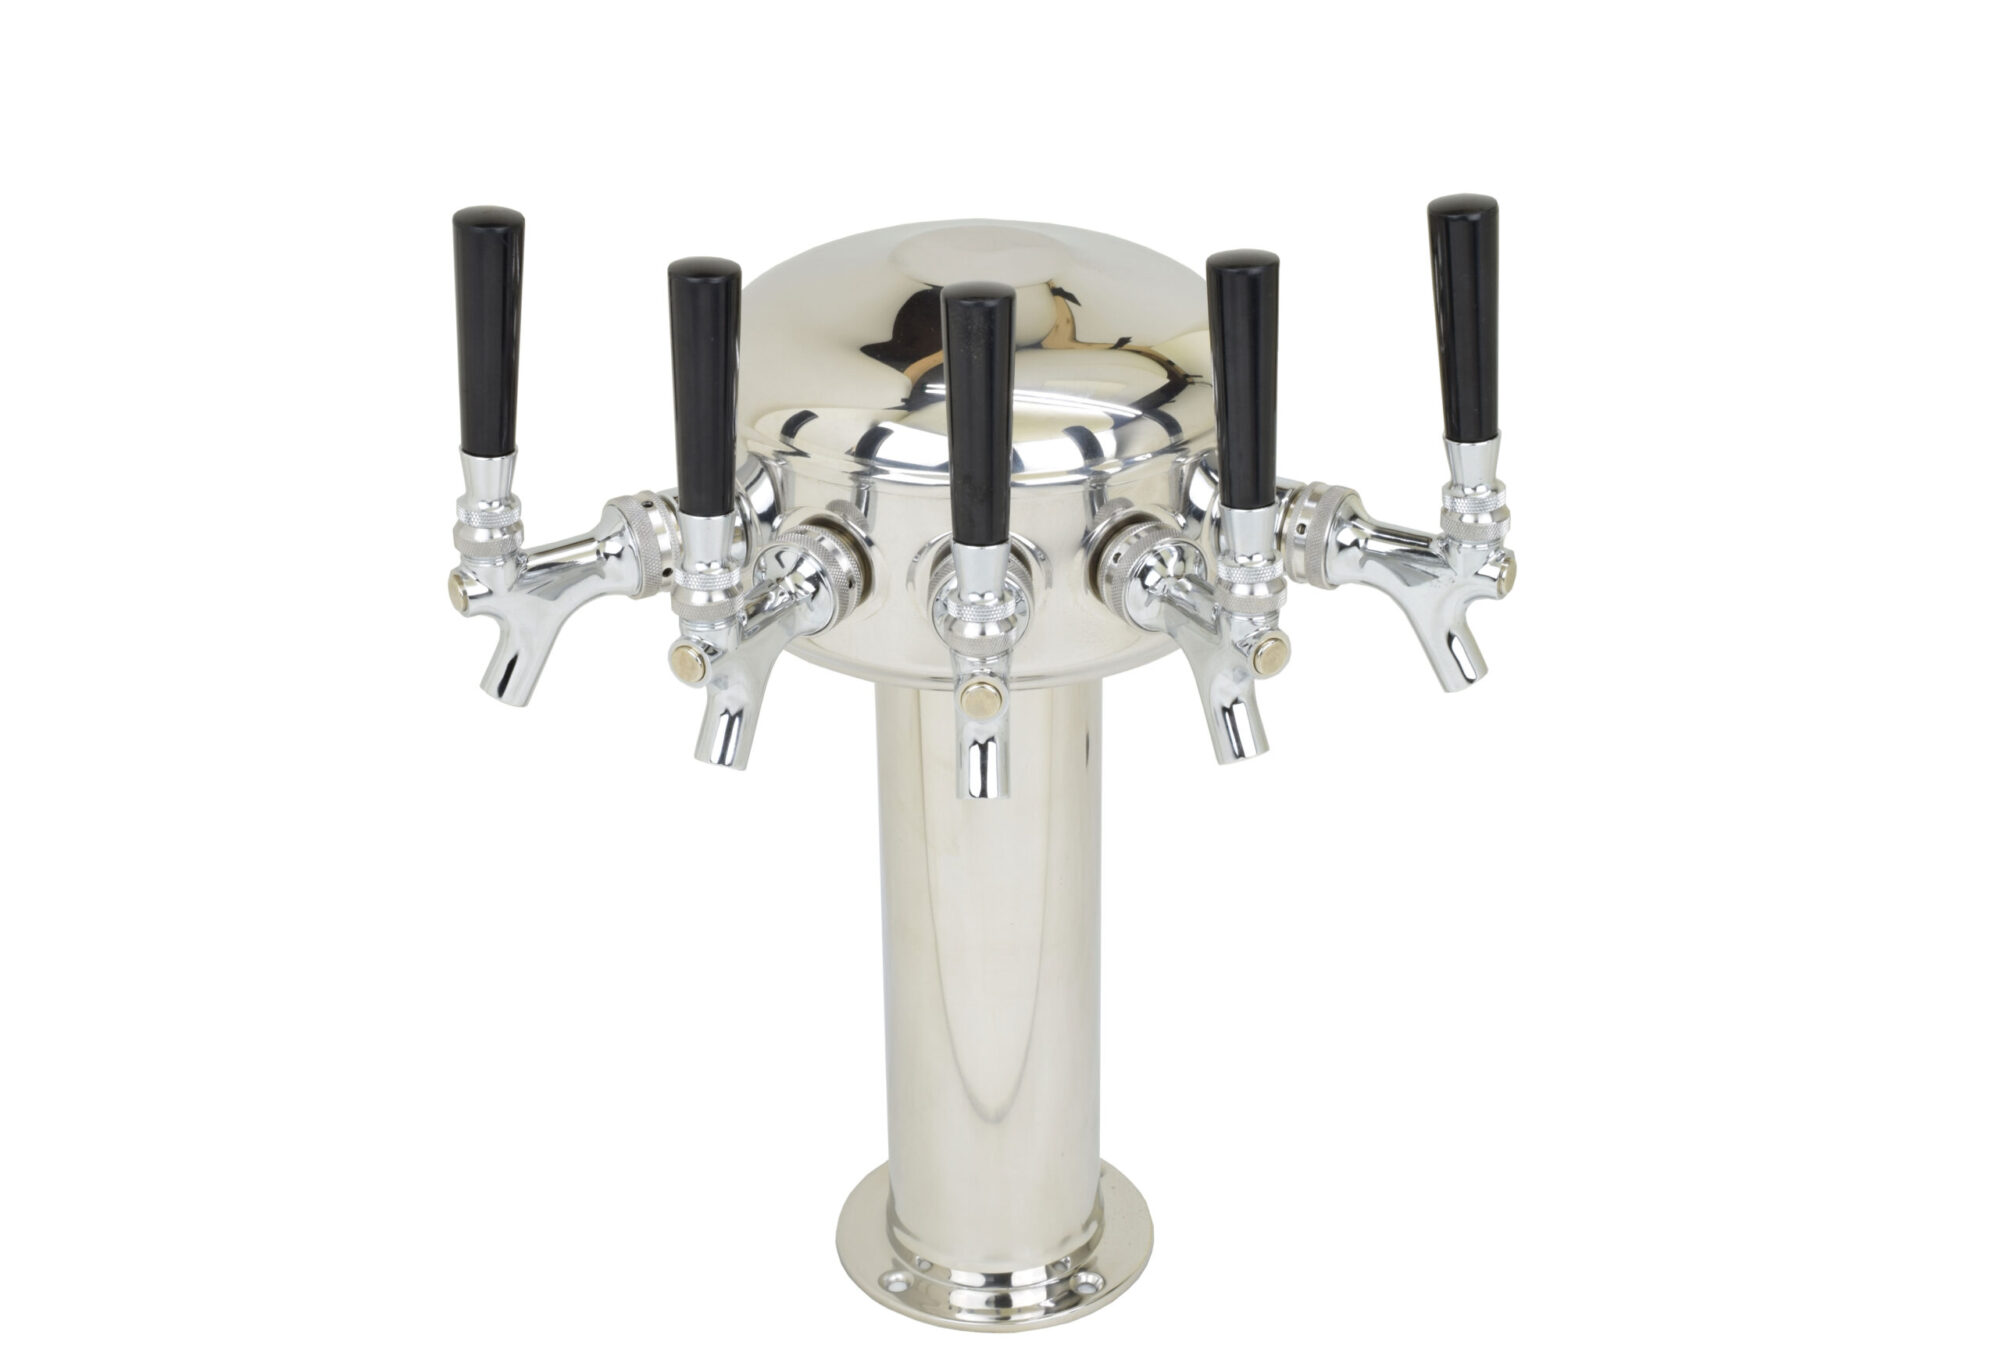 626C-5 Five Faucet Mini Mushroom Tower with Chrome Plated Faucets and Shanks